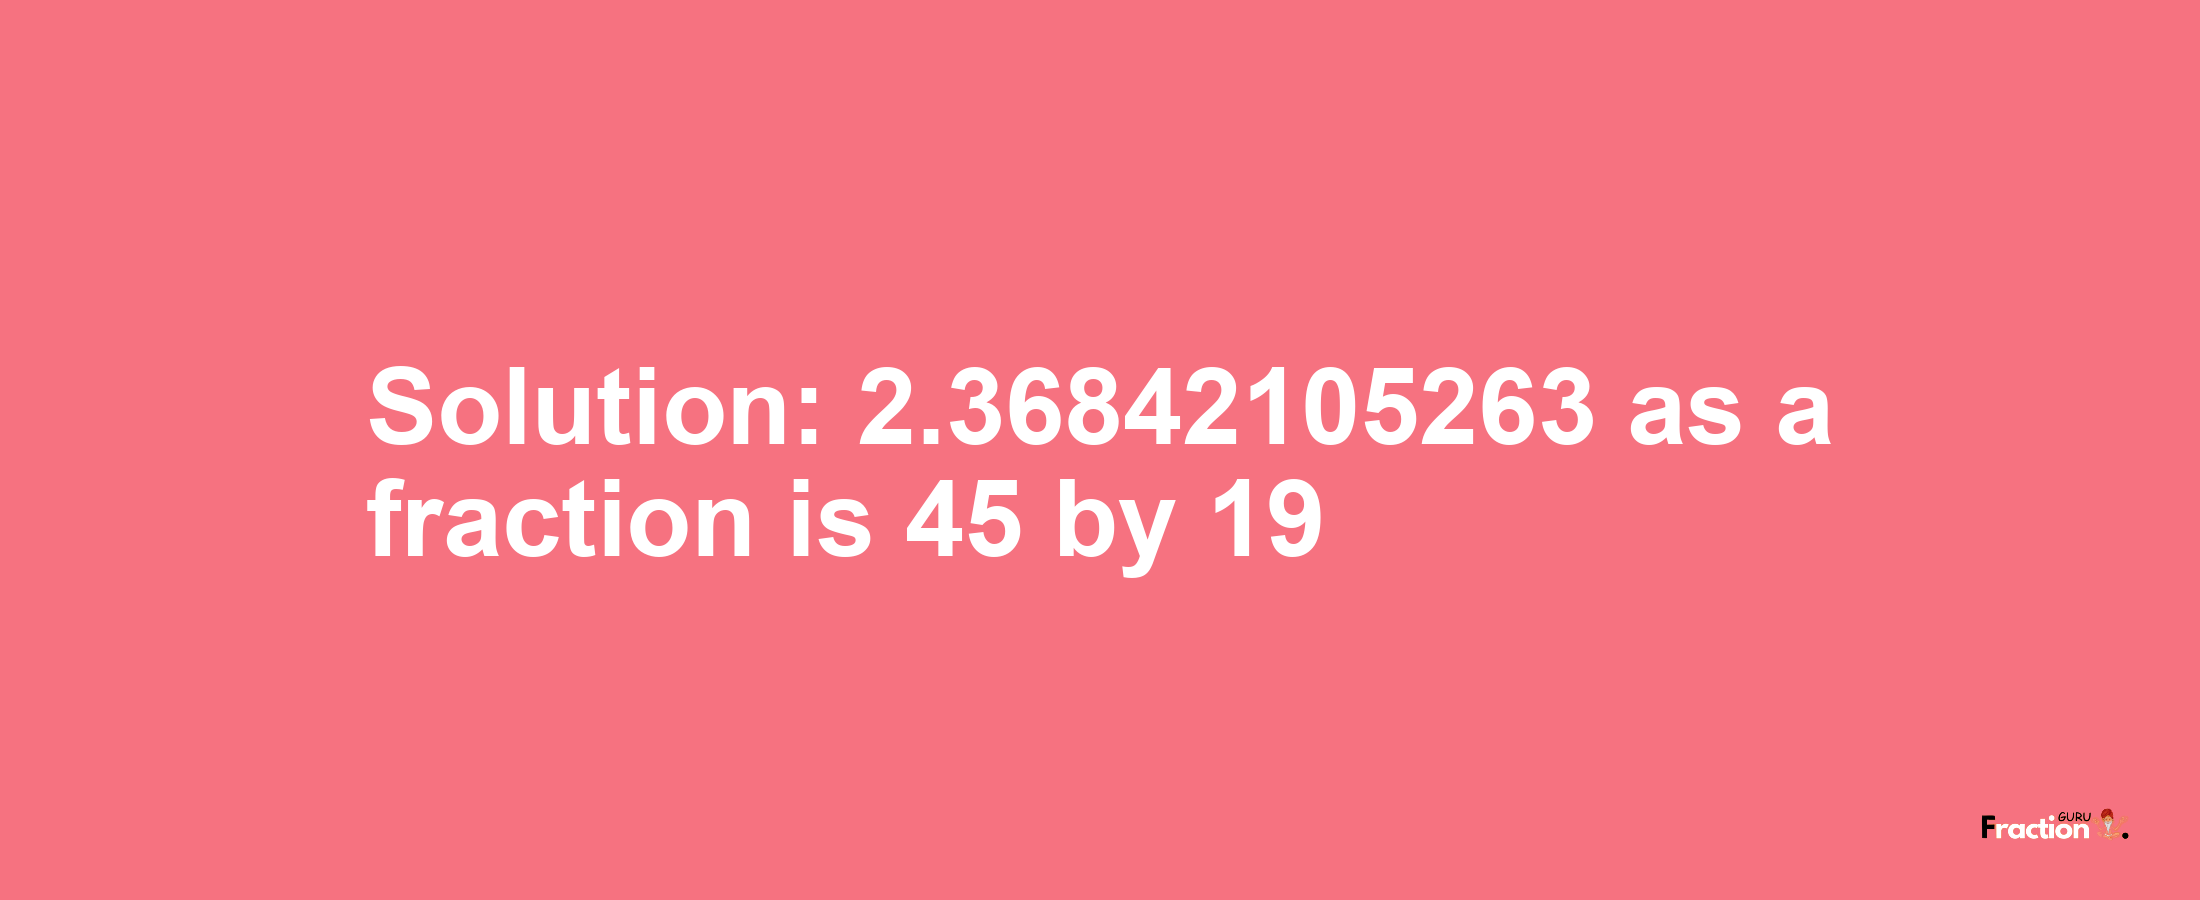 Solution:2.36842105263 as a fraction is 45/19